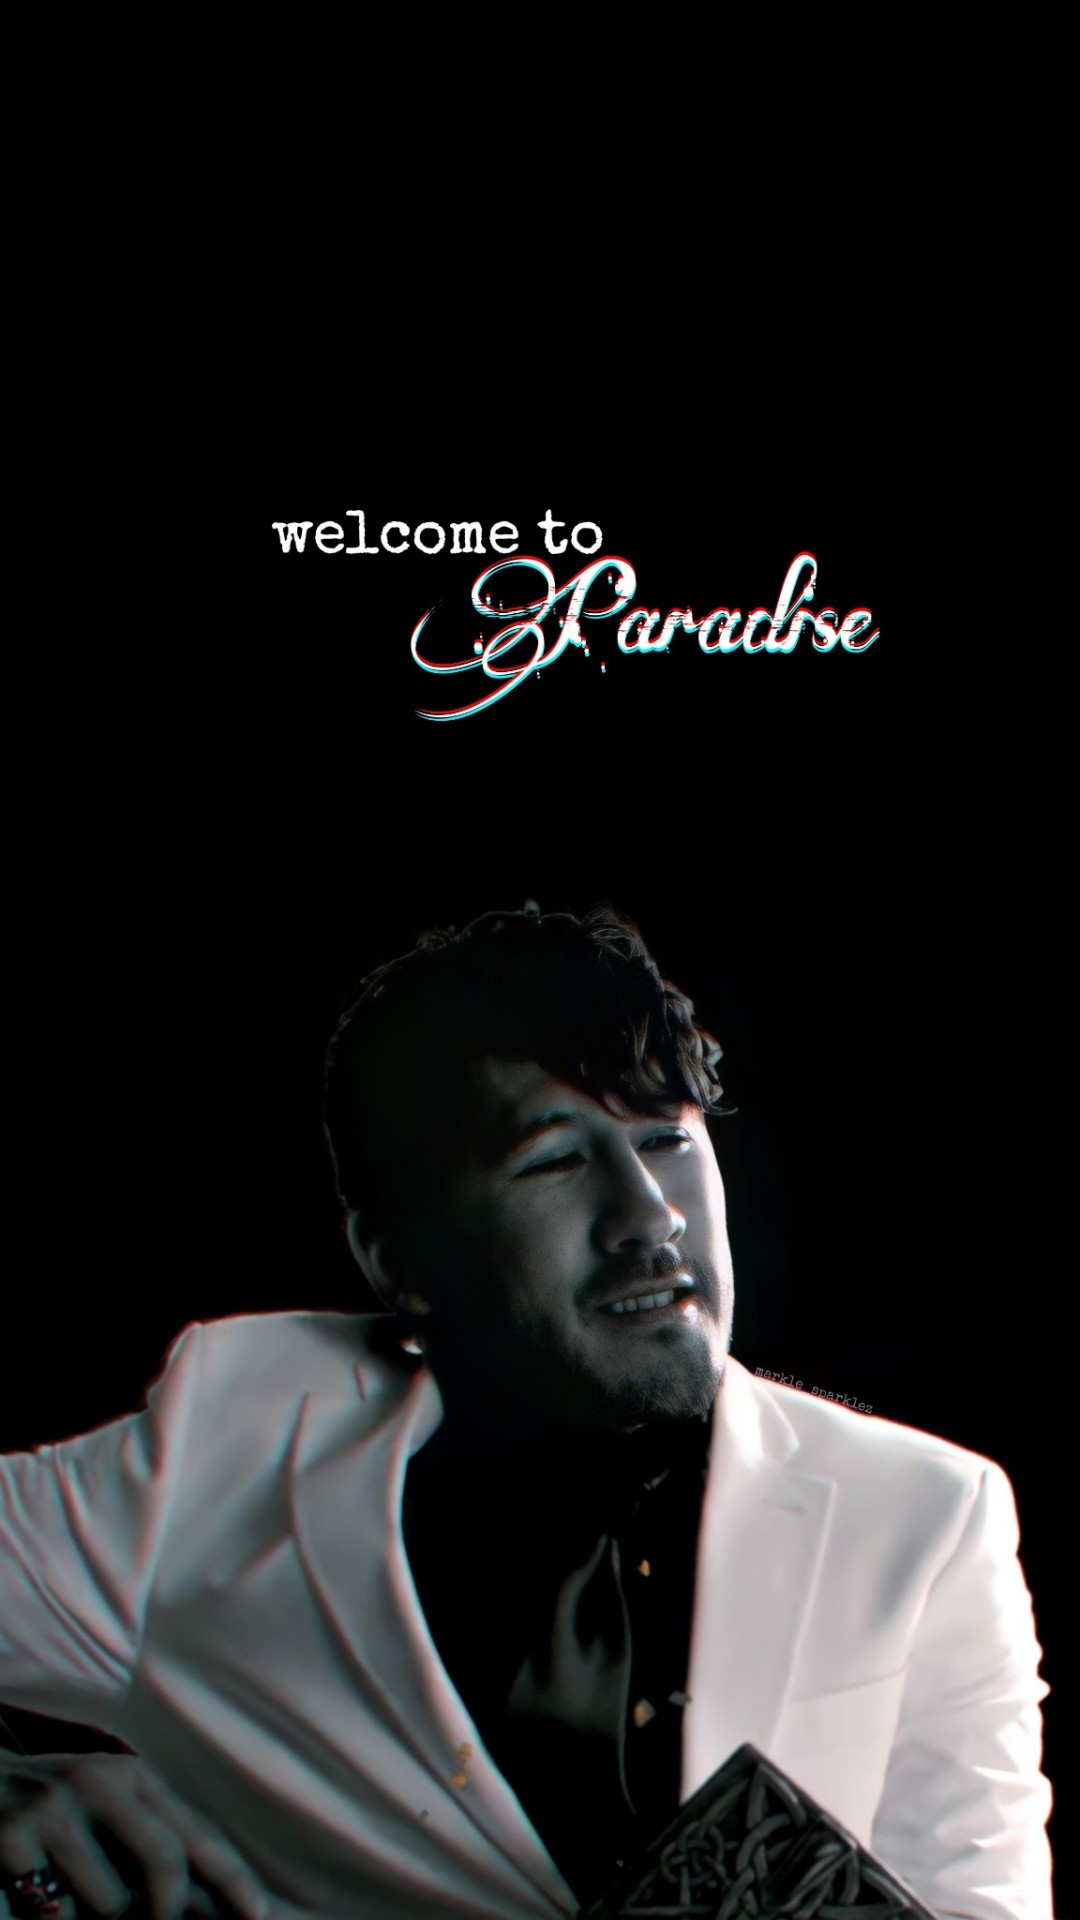 Welcome to paradise wallpaper for phone and desktop background of harry styles - Markiplier